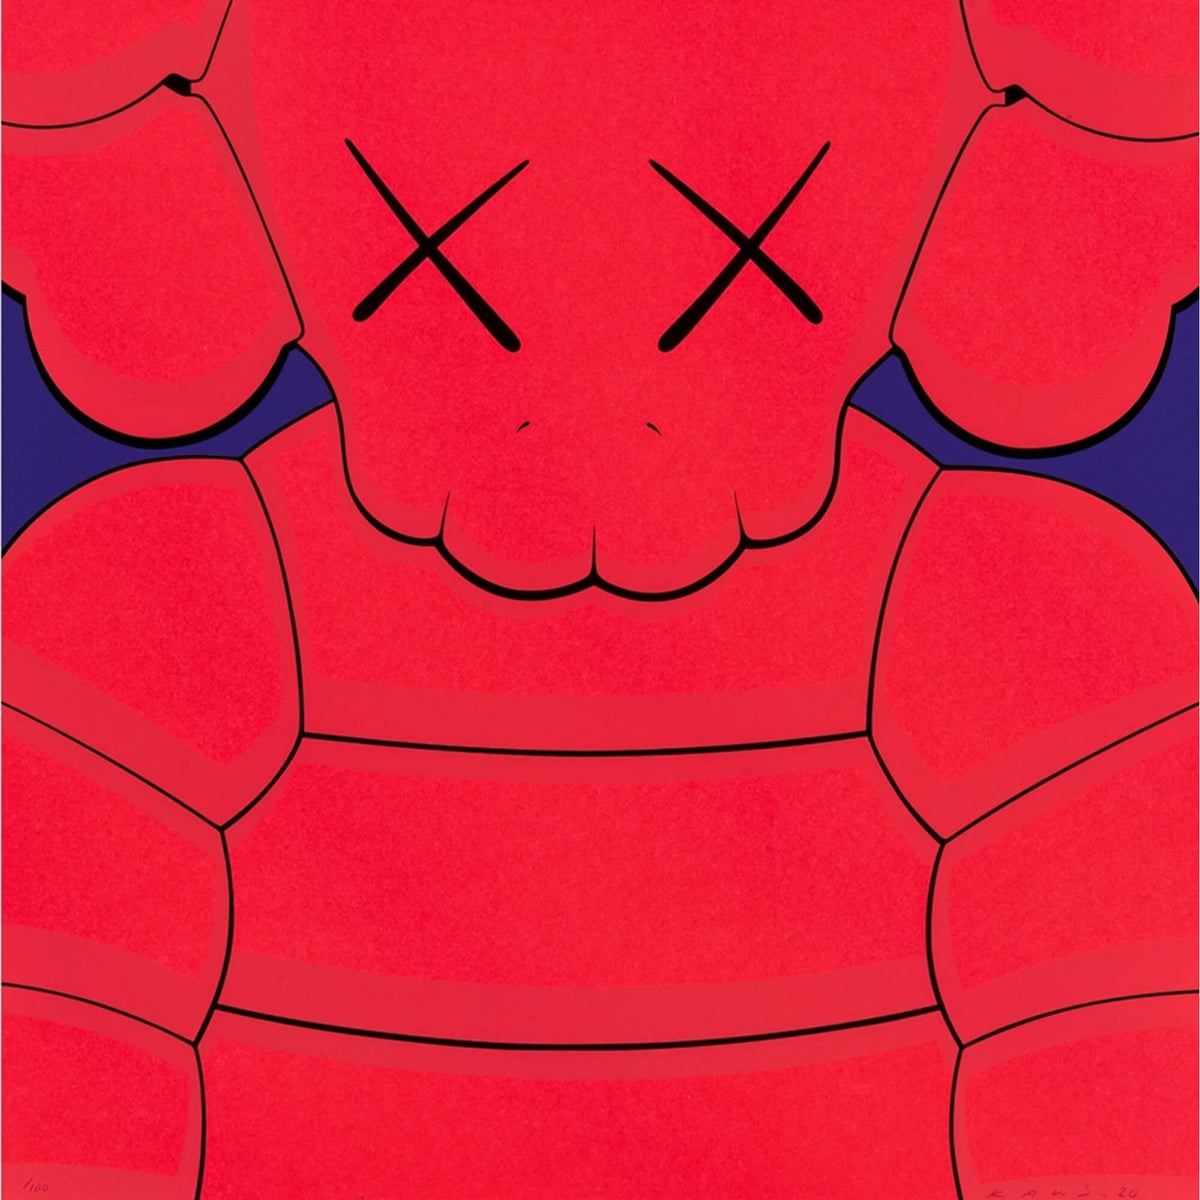 KAWS's What Party (Red On Blue) Print - Hype Museum